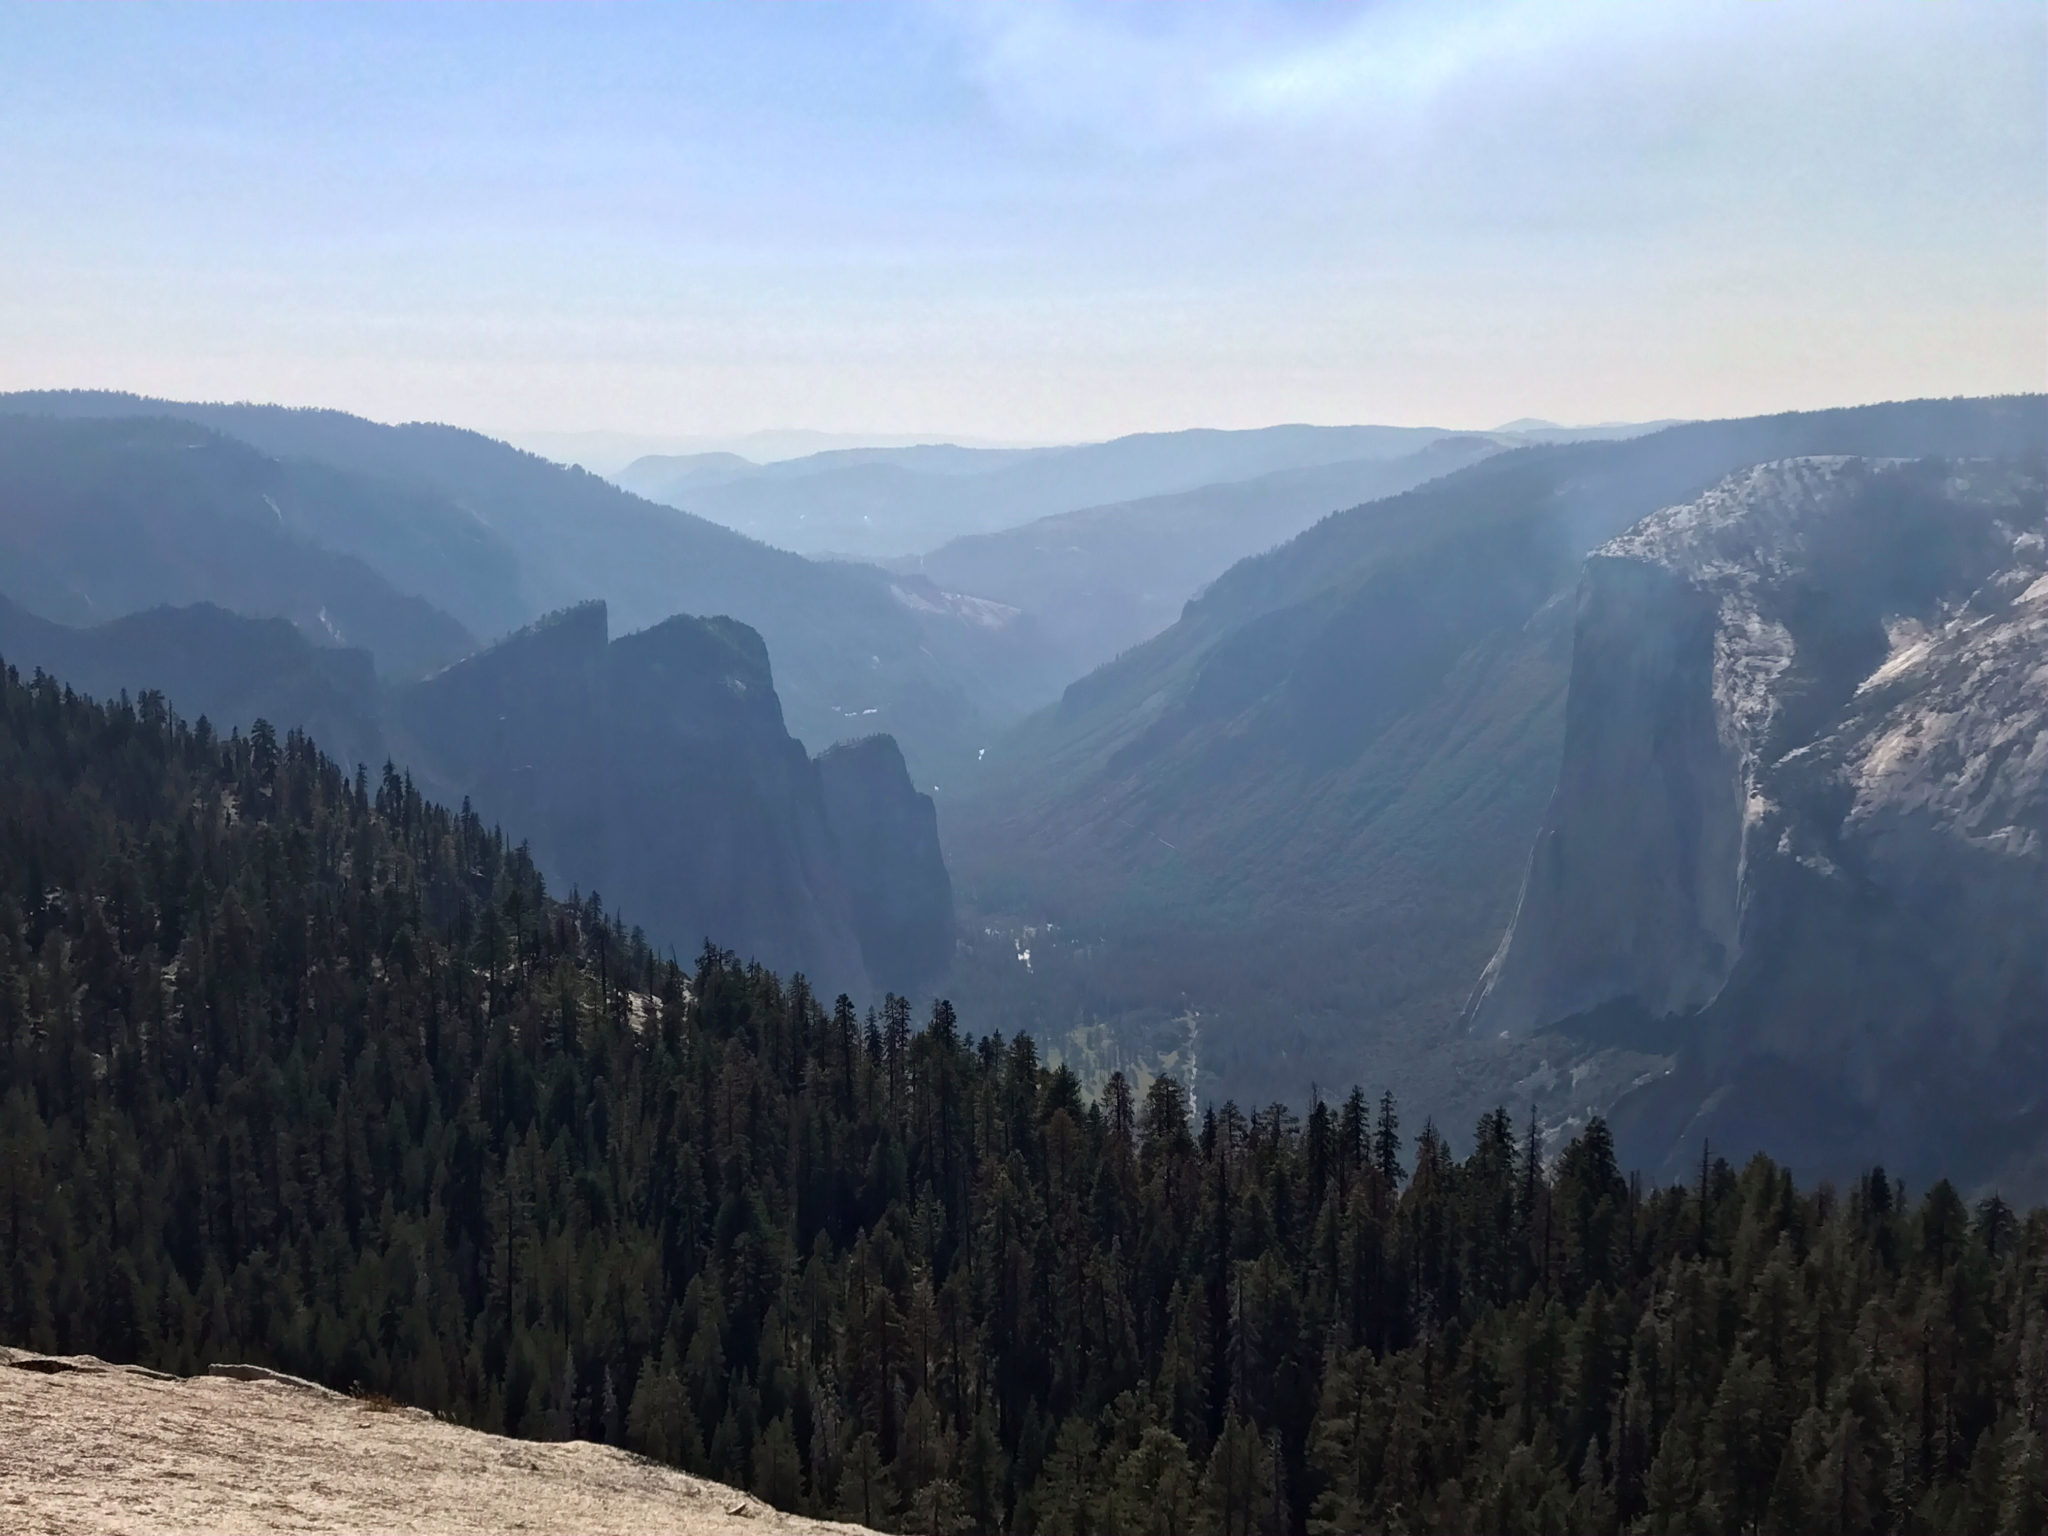 View of Yosemite Valley and El Capitan from Sentinel Dome